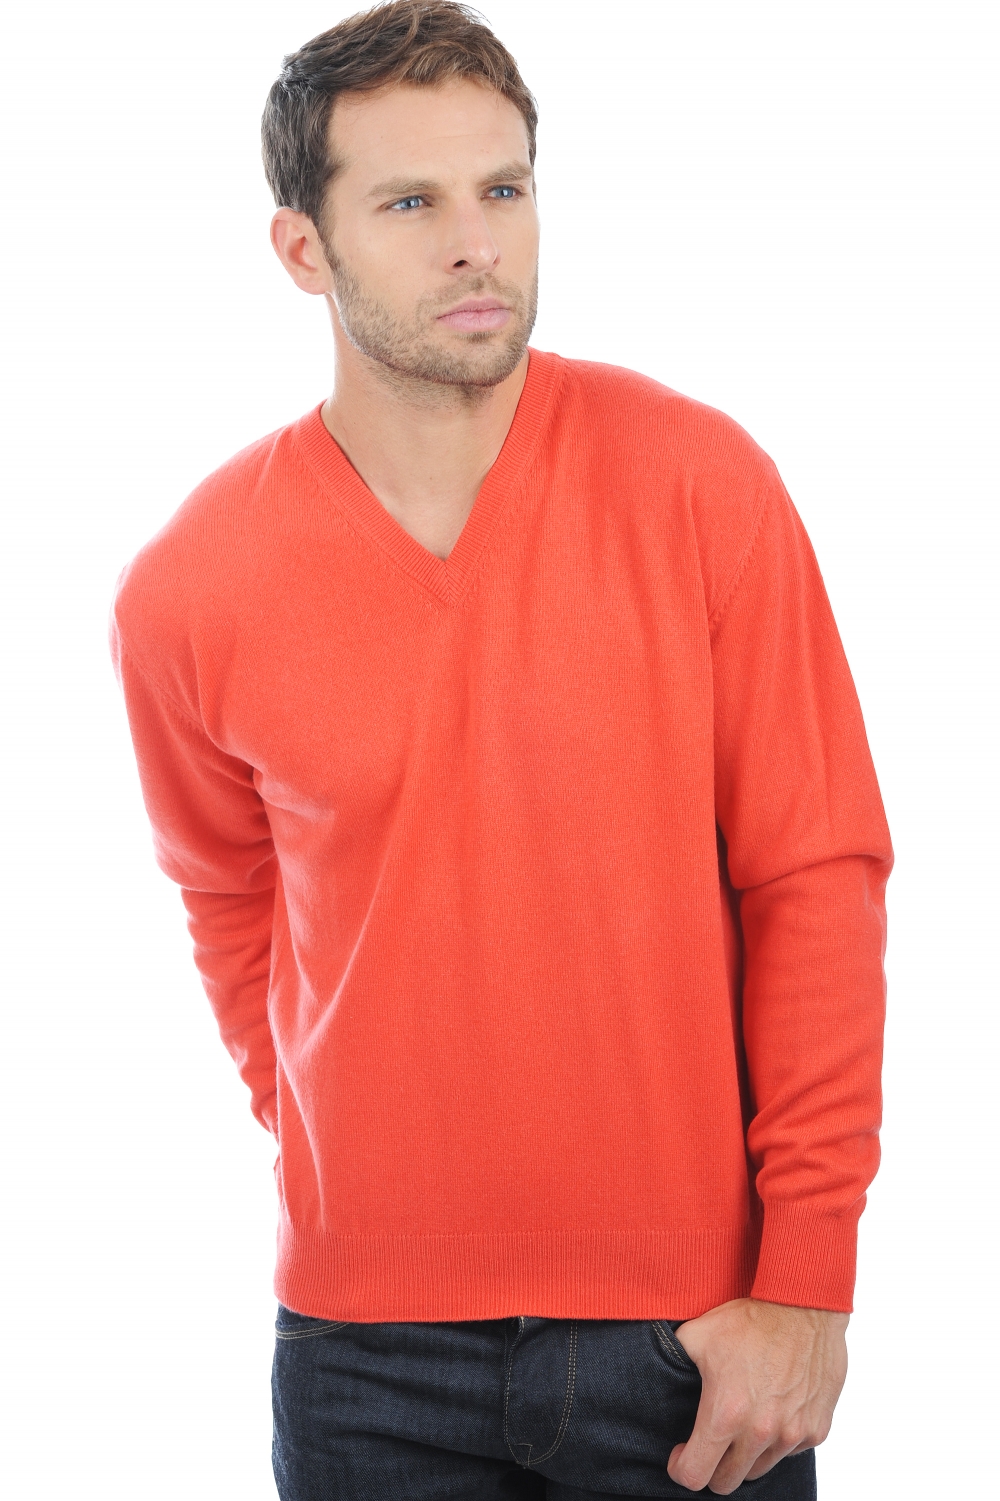 Cachemire pull homme gaspard corail lumineux s